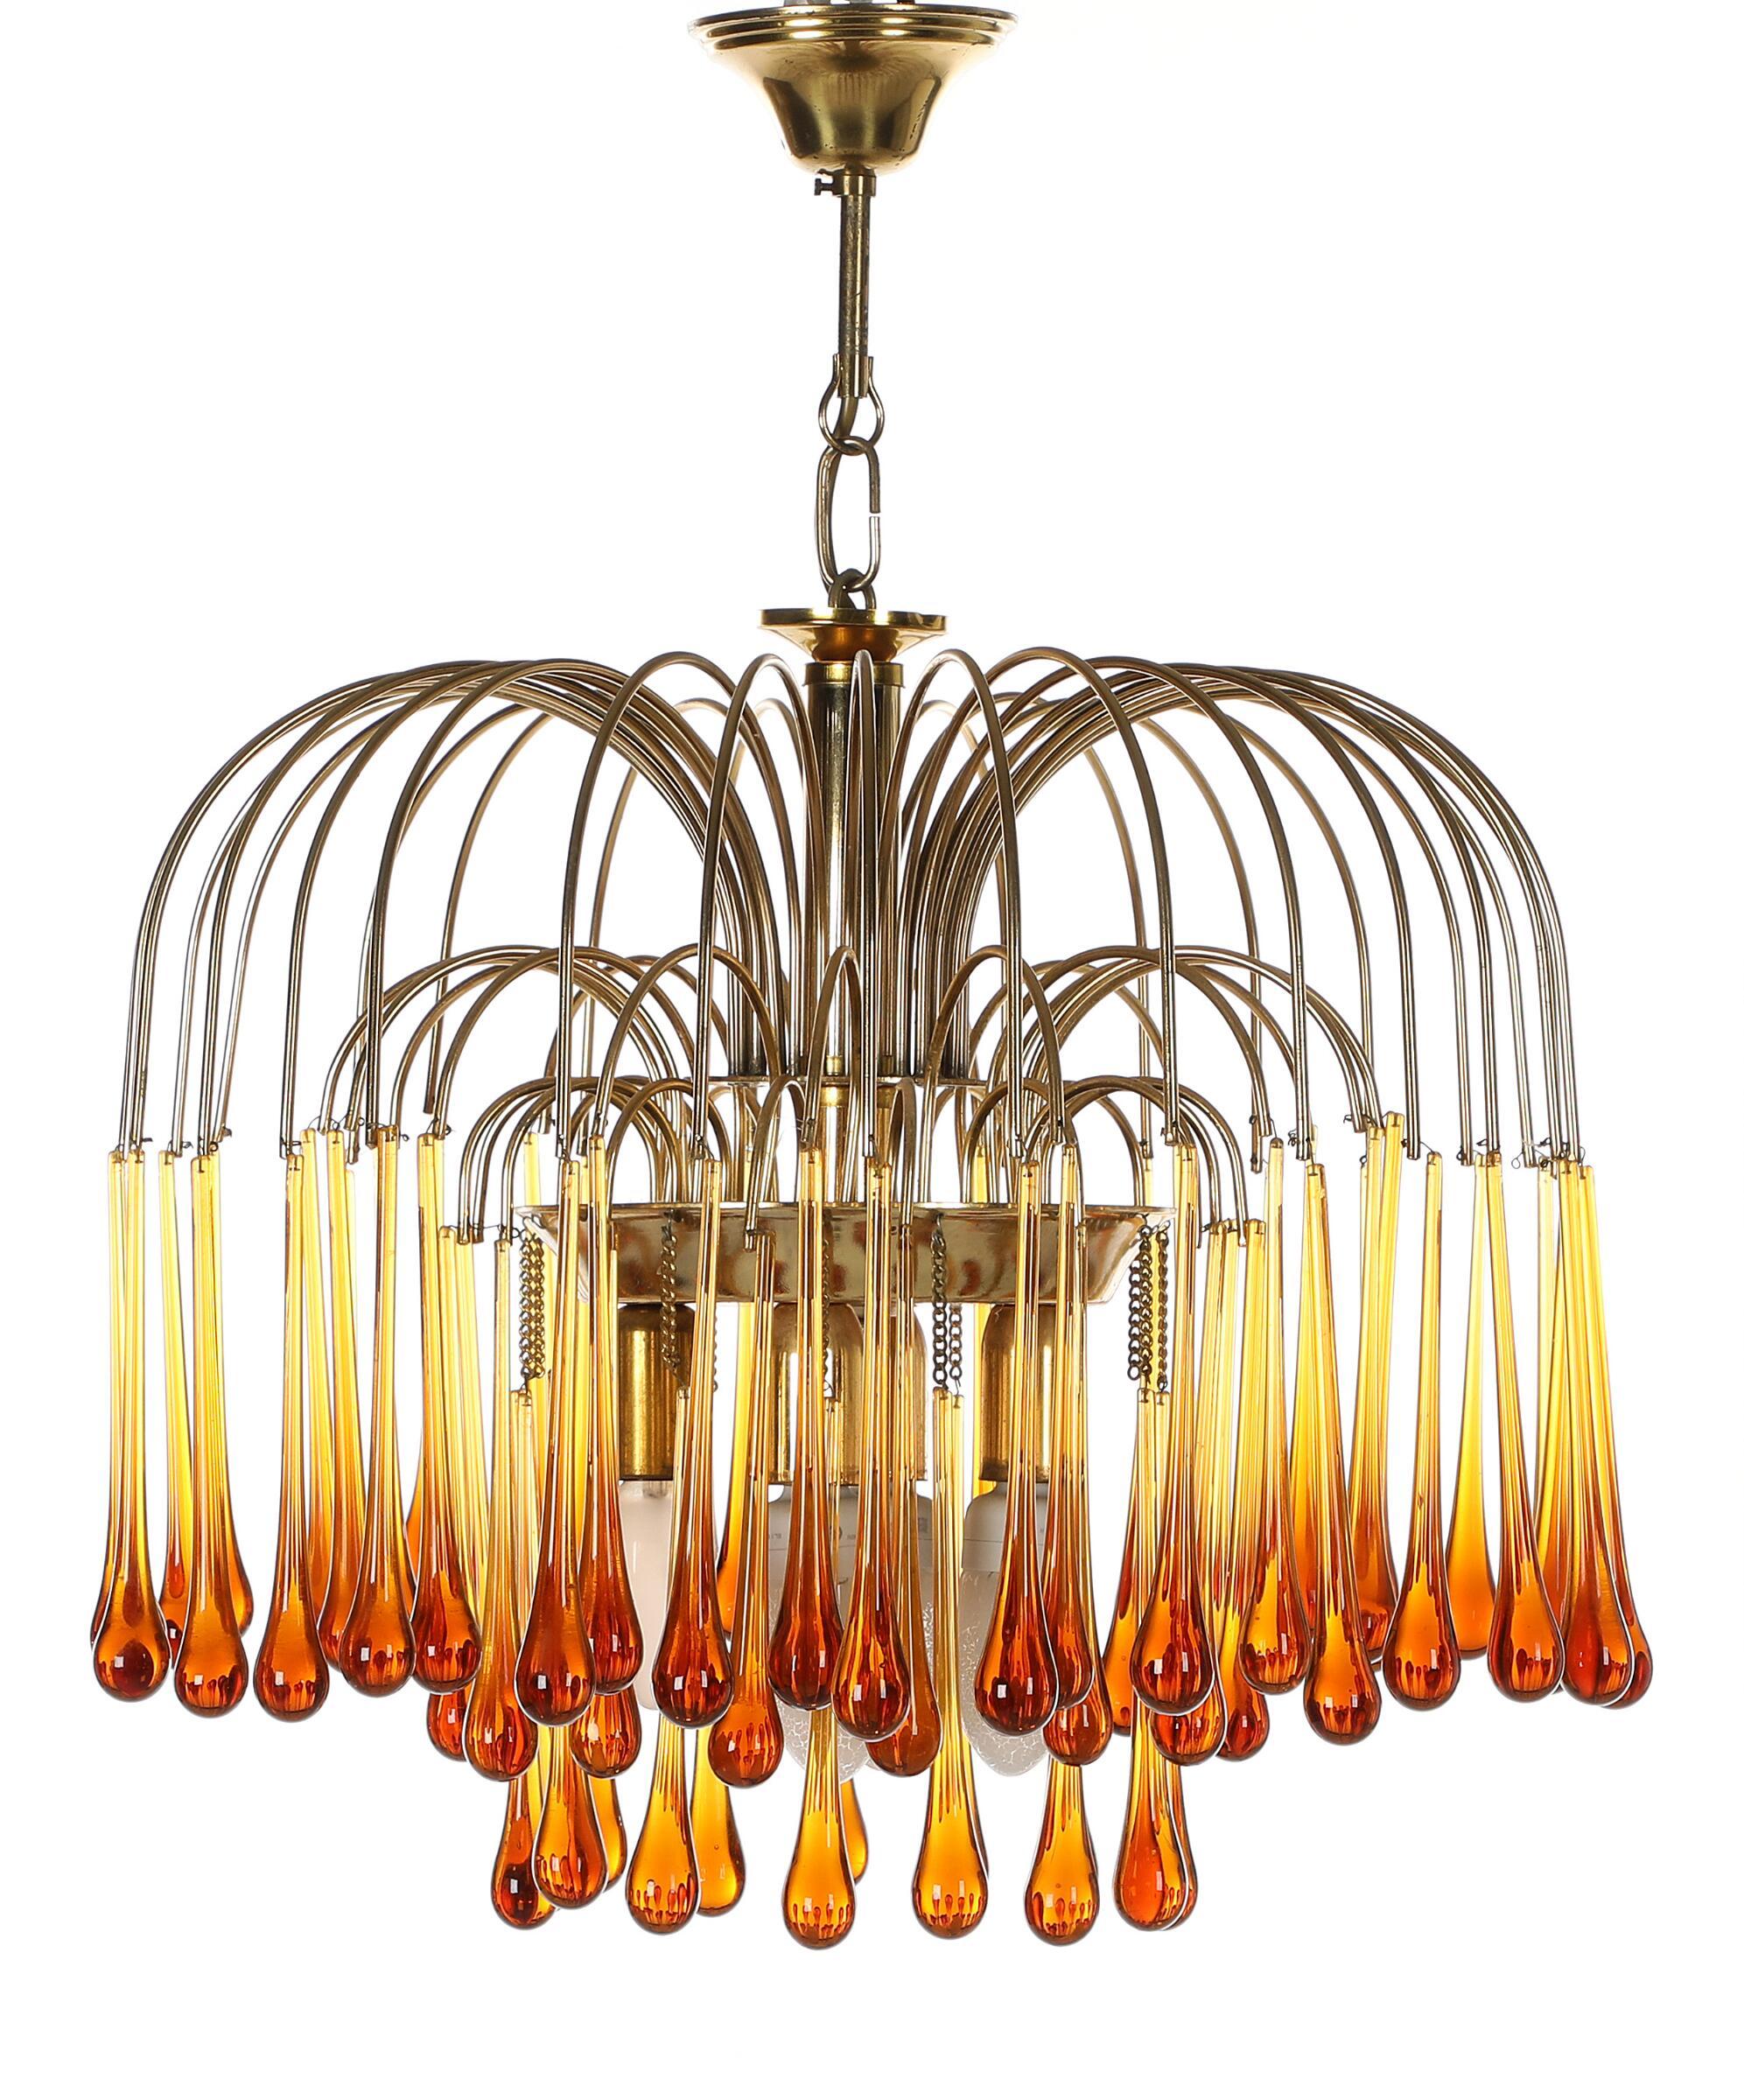 German Brass Chandelier, Hung with Drop-Shaped Prisms of Amber Glass For Sale